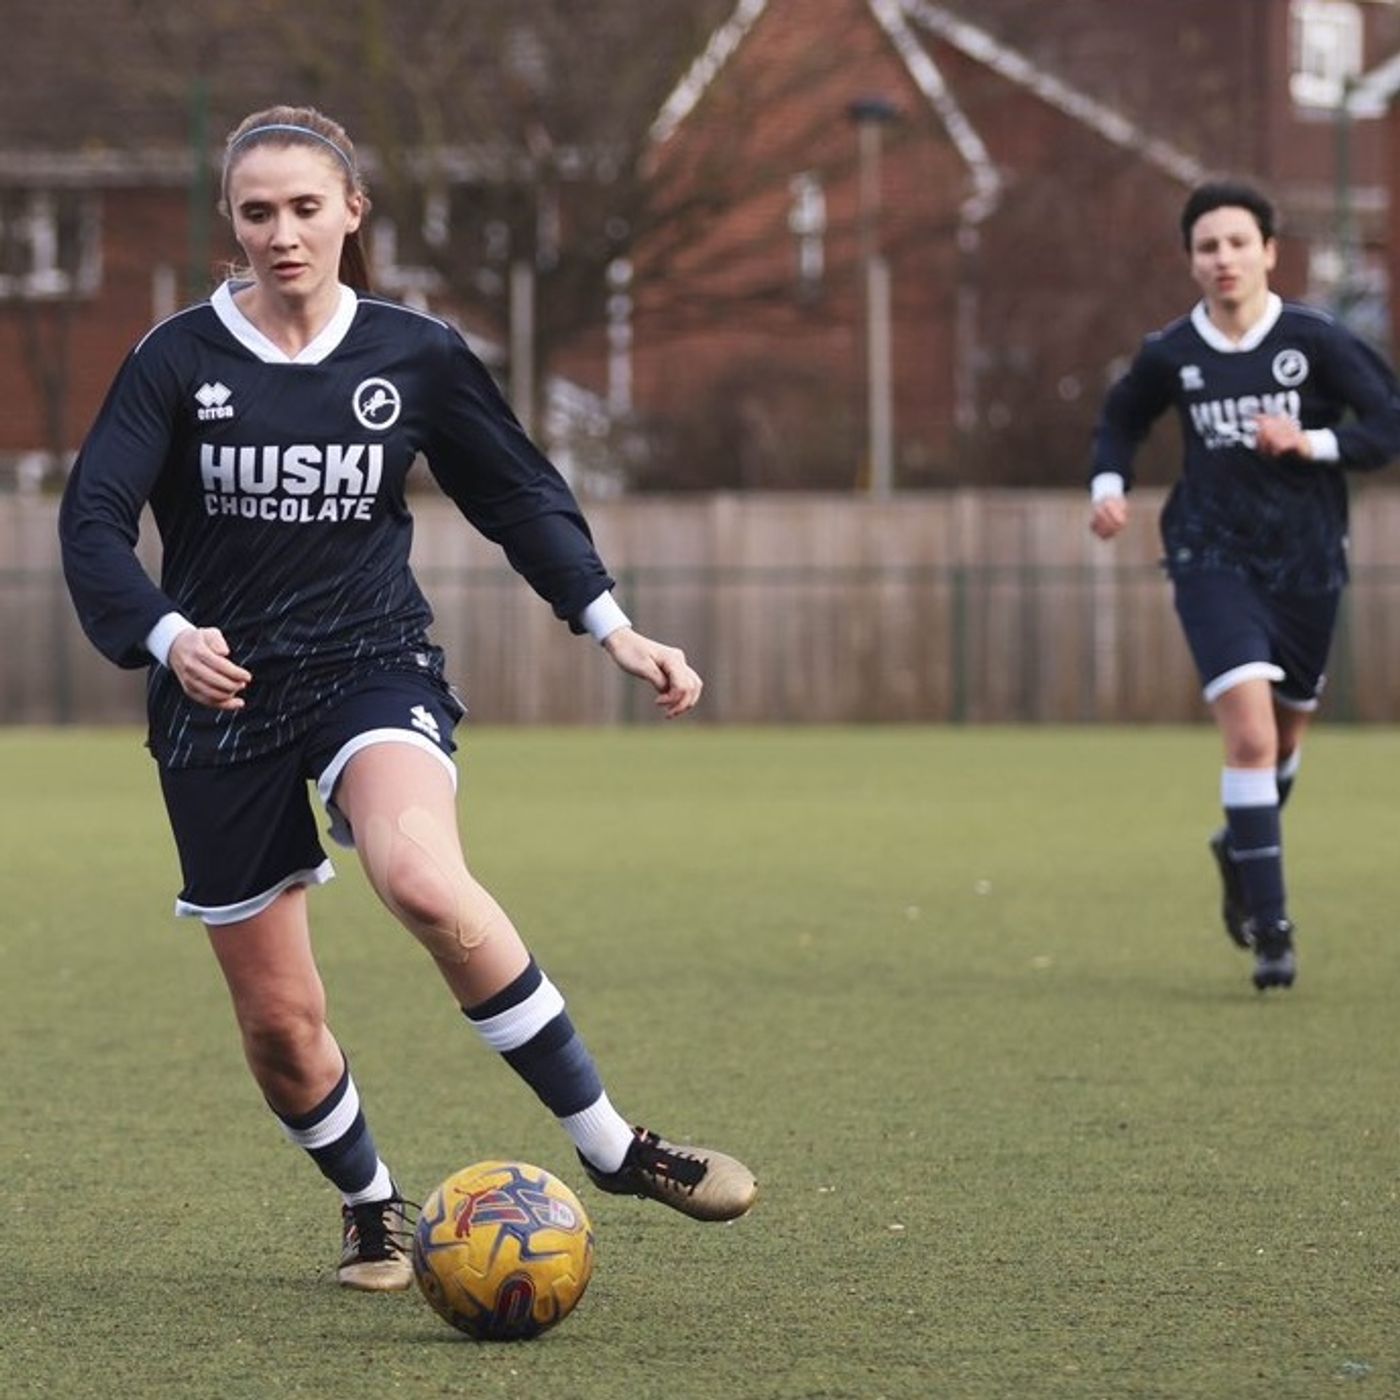 Jeff Burnige Reports for Maritime Radio - Millwall Lionesses v Enfield Ladies 230424